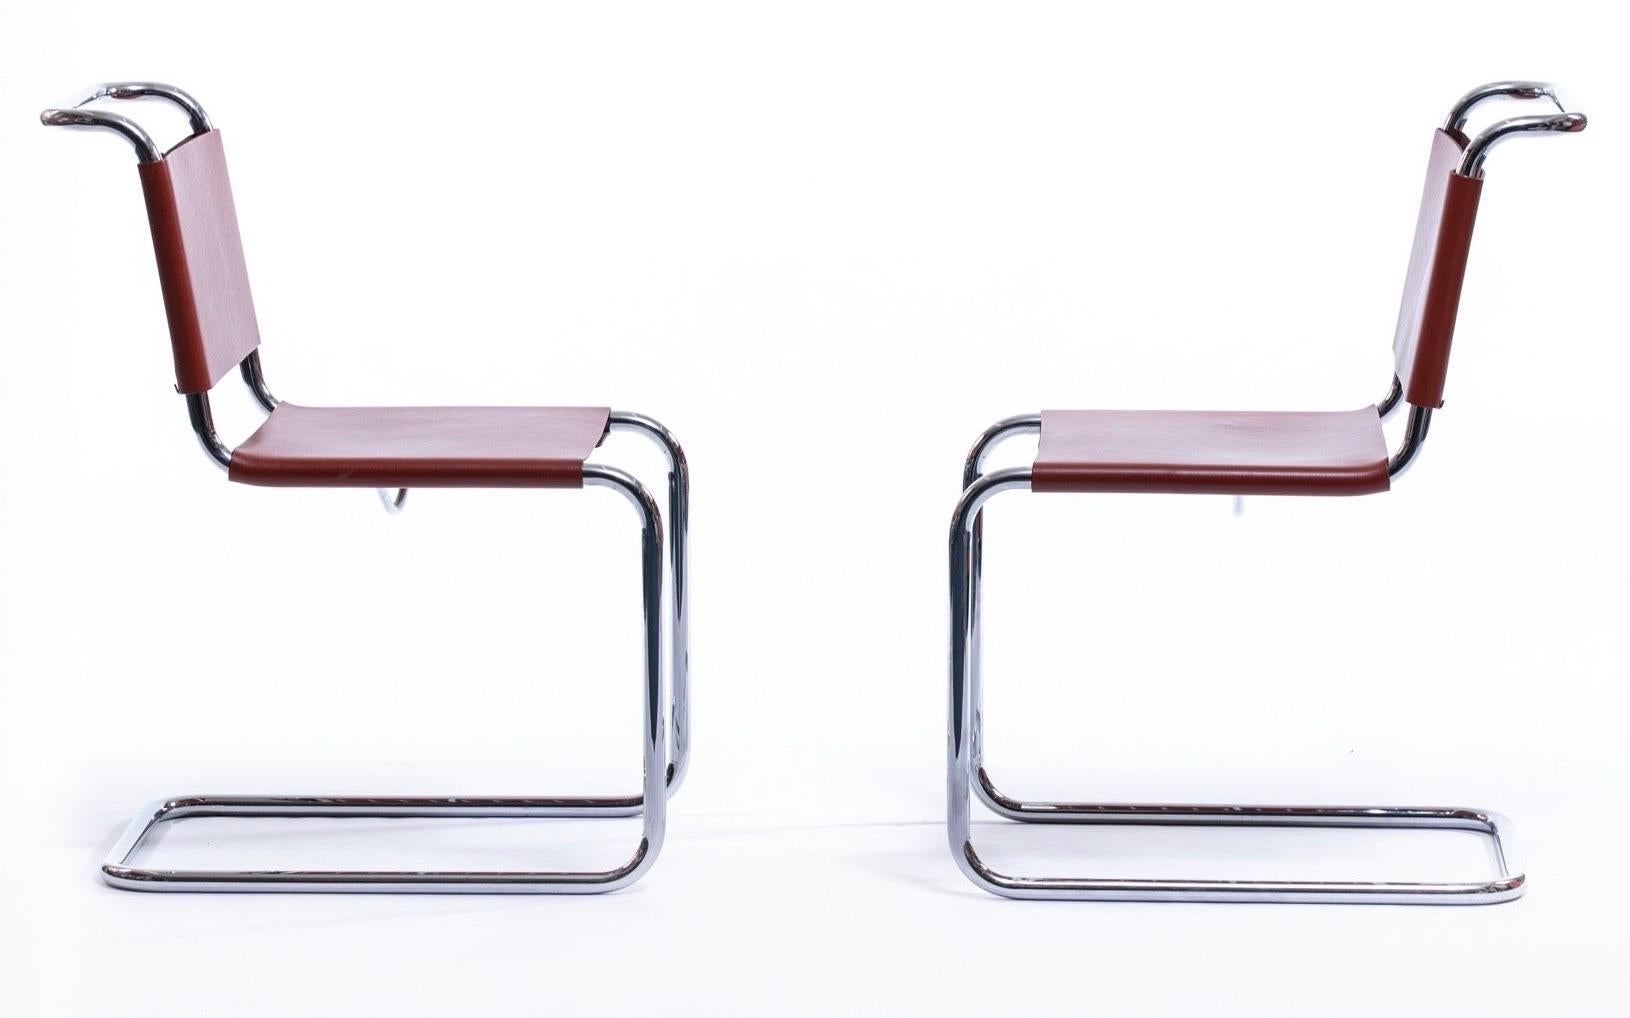 Knoll Spoleto chairs.  Designed by Knoll to compliment the collection of Mies Van der Rohe pieces. . Purchased from Knoll in 1974 along with a pair of caramel Barcelona chairs. Caramel leather with polished chrome frames, laced backs and spring